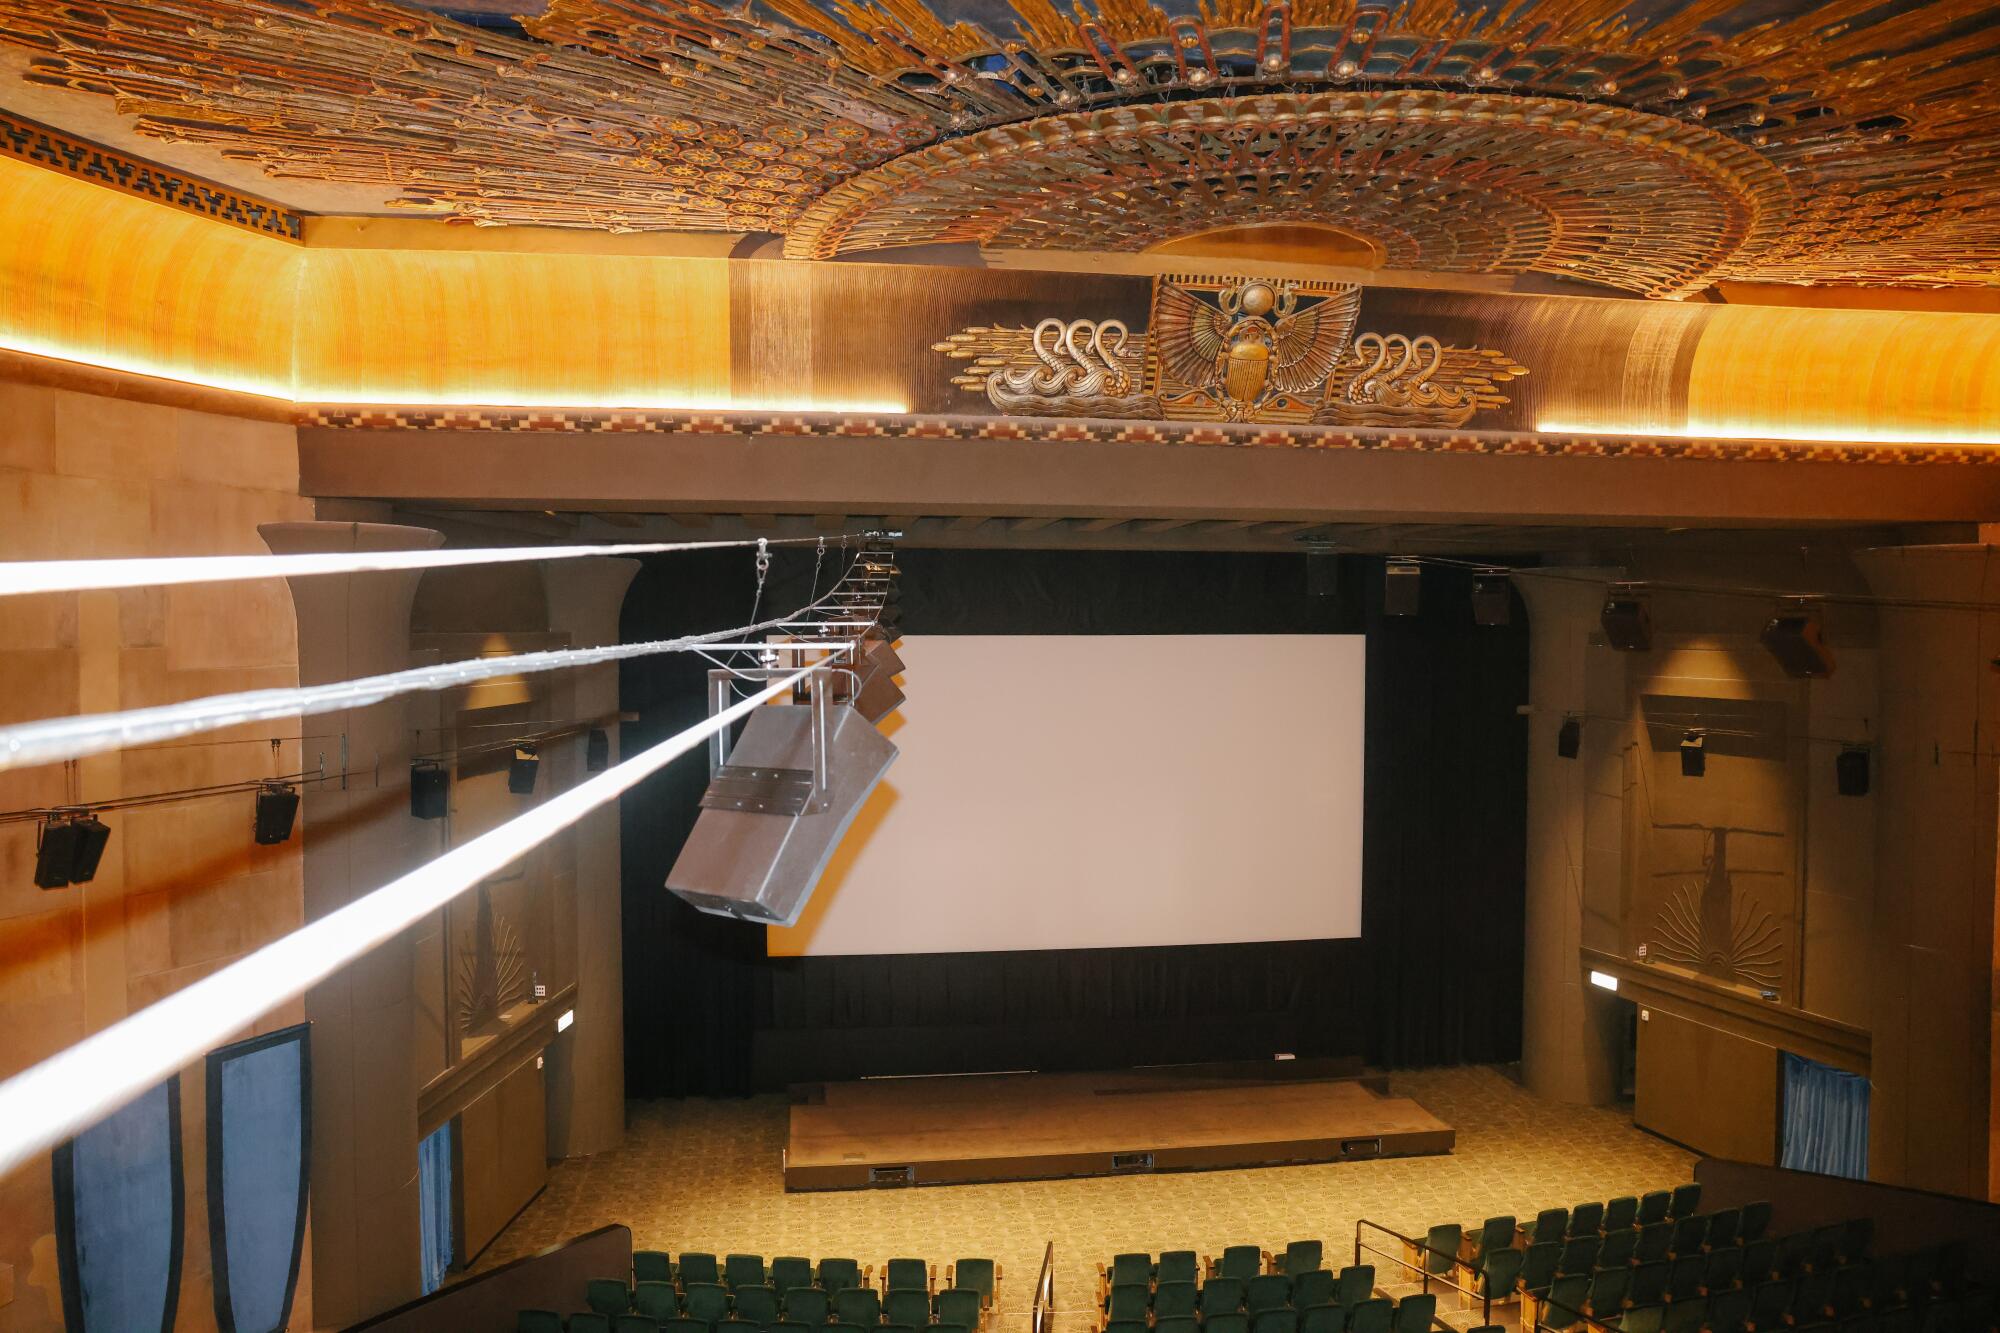 The screen and ceiling of a capacious movie palace, restored to its silent-era splendor.